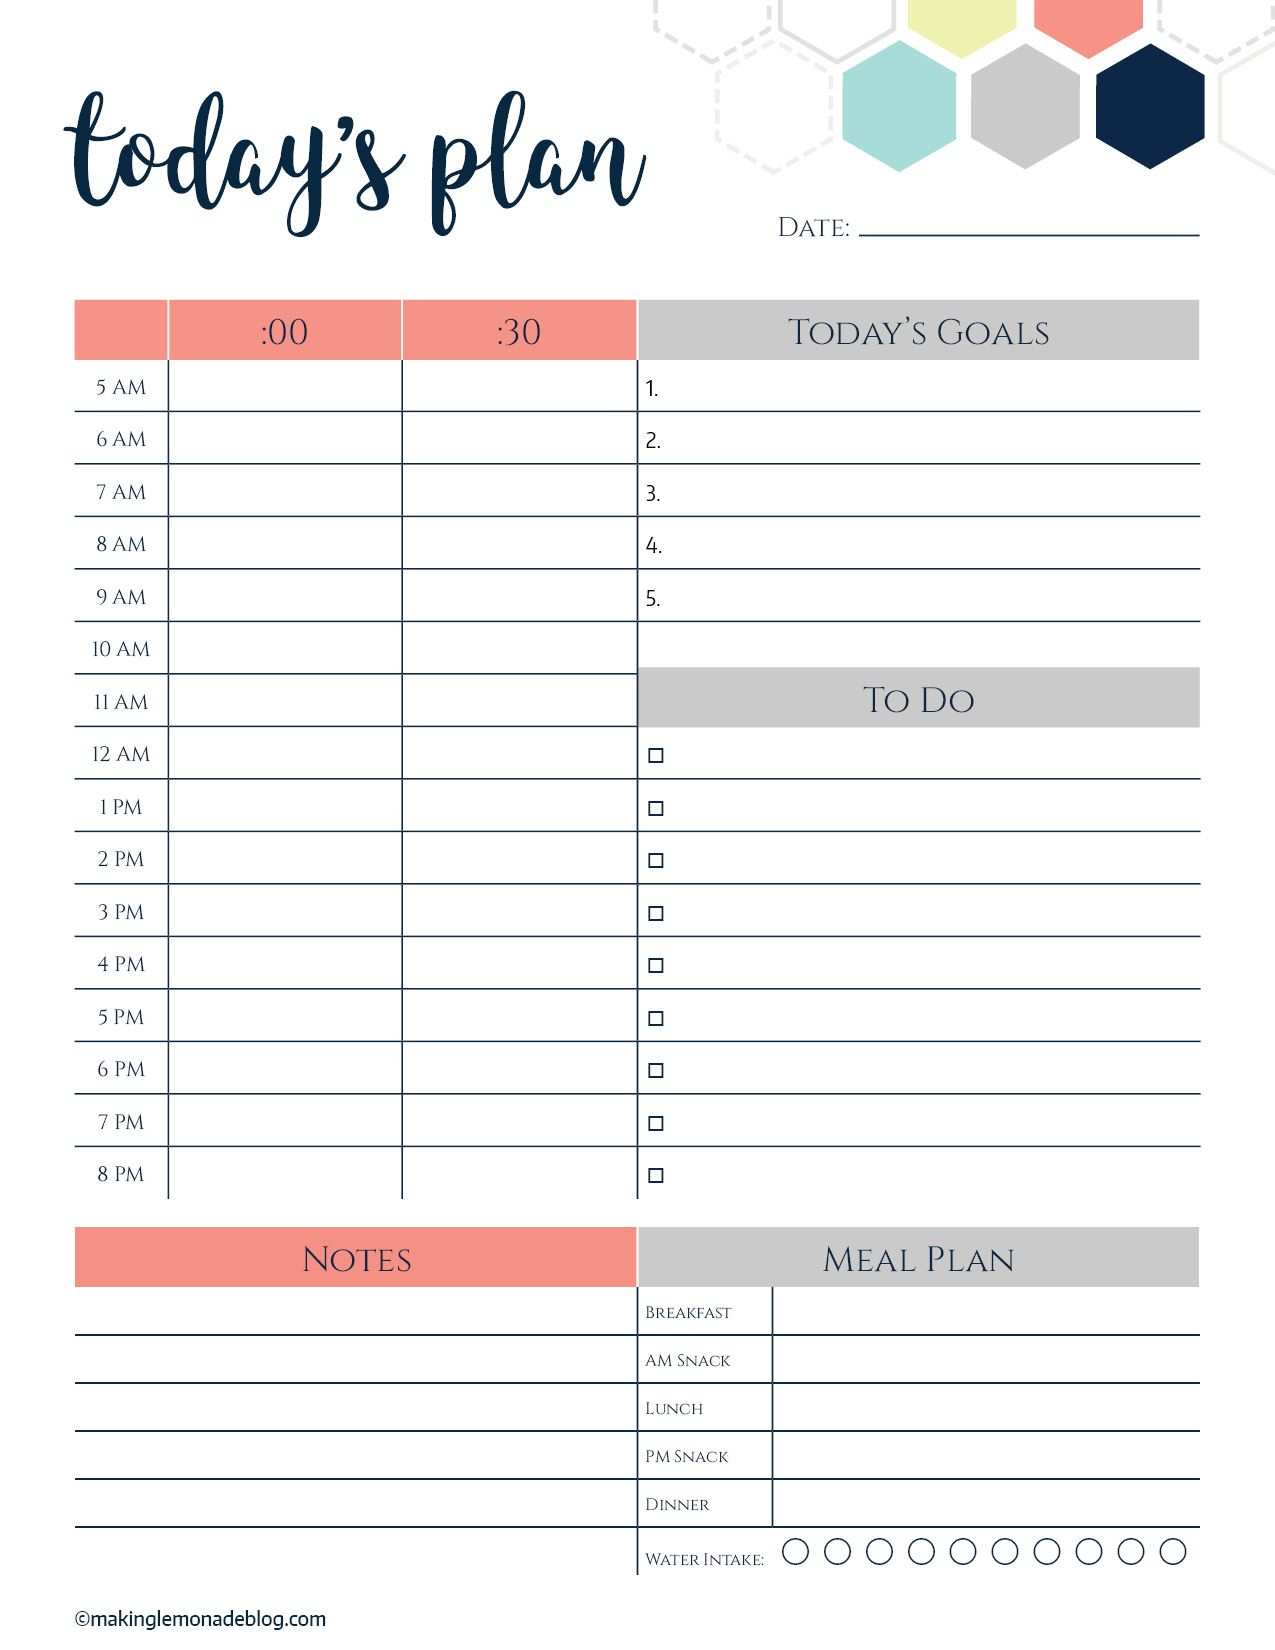 The One Printable I Can T Function Without Free Daily Planner Daily Planner Printables Free Weekly Planner Free Free Weekly Planner Templates